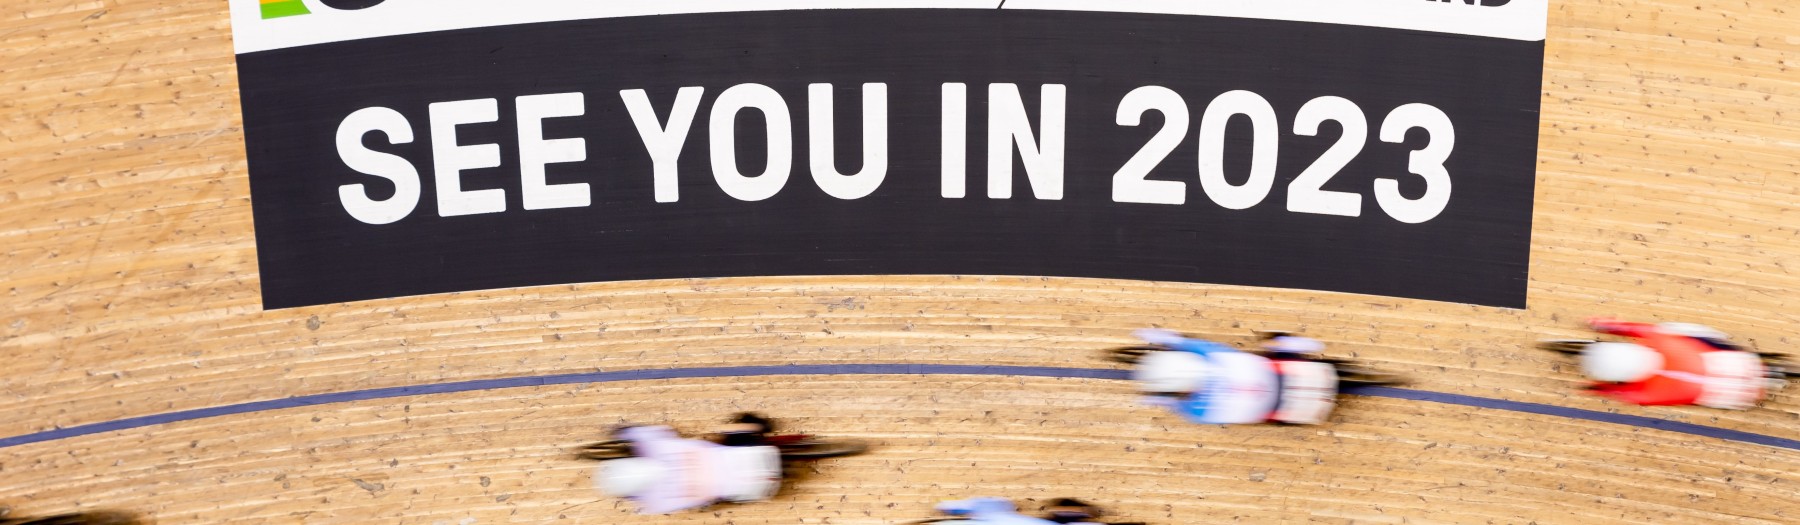 Aerial shot of cyclists on the bend of a track. An advertisement can be seen which reads: "See you in 2023" 